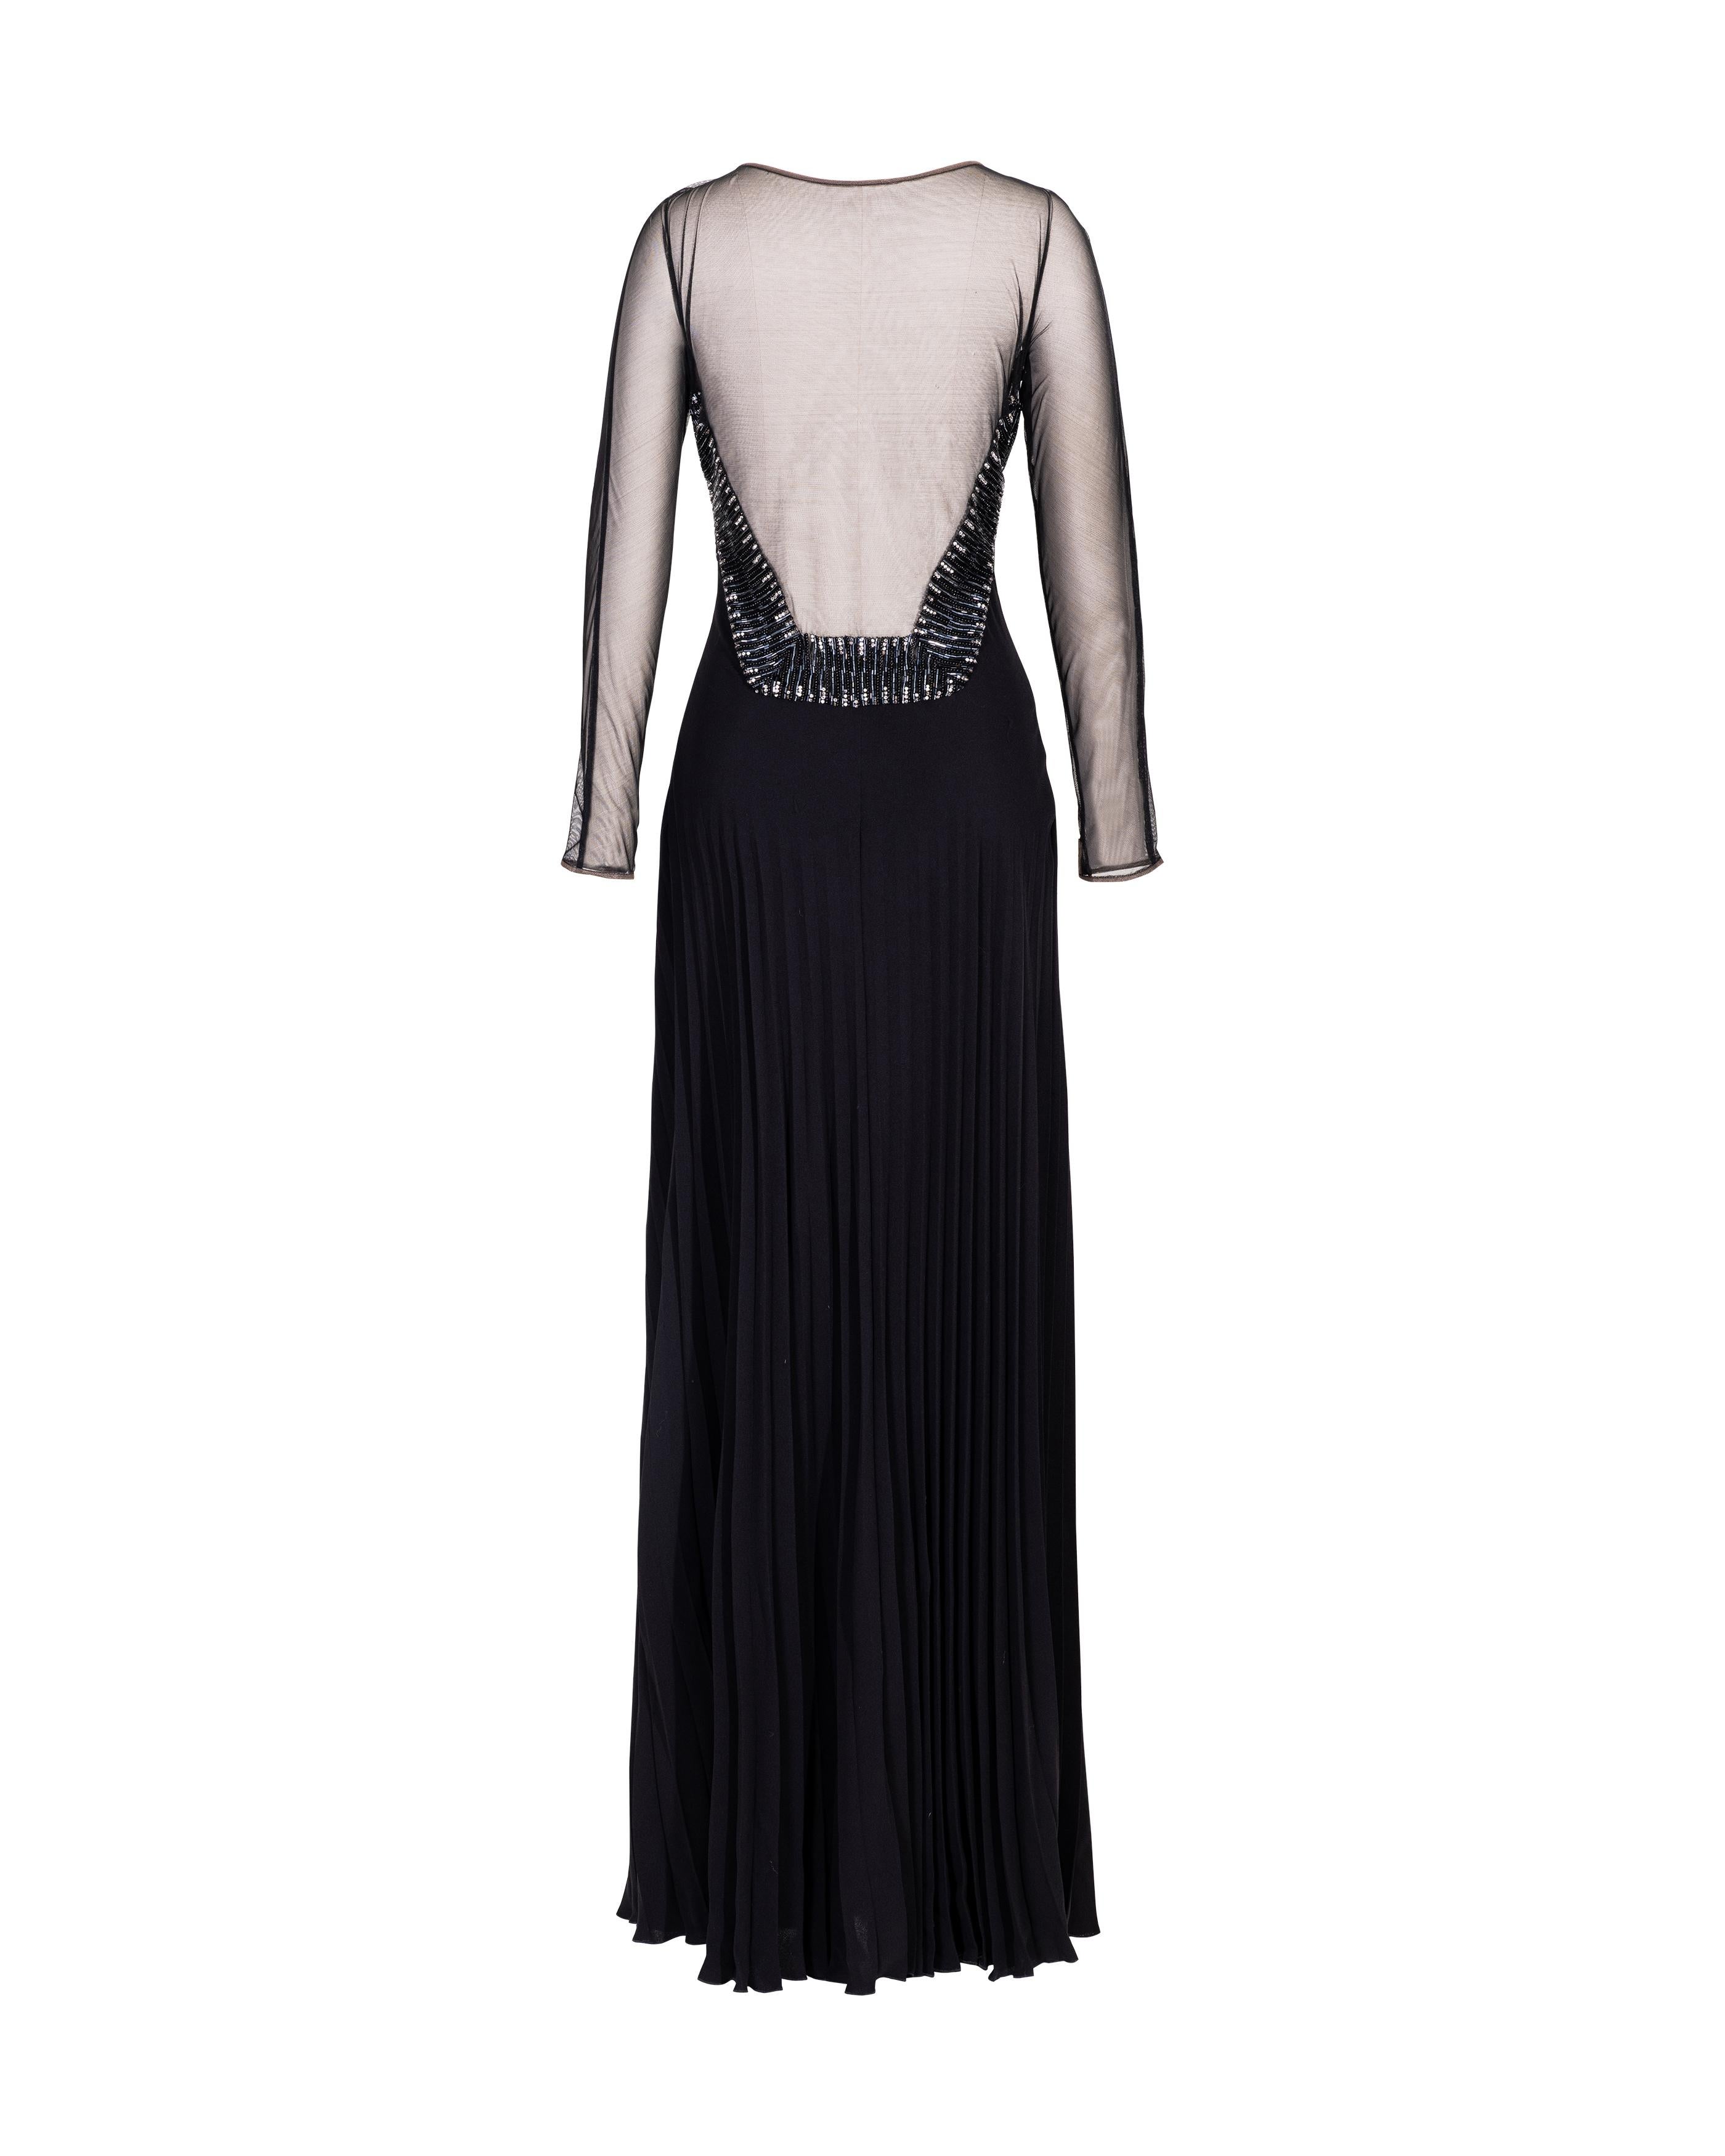 Women's c. 1999 Valentino (Attributed) Black Long Sleeve Embellished Silk and Mesh Gown